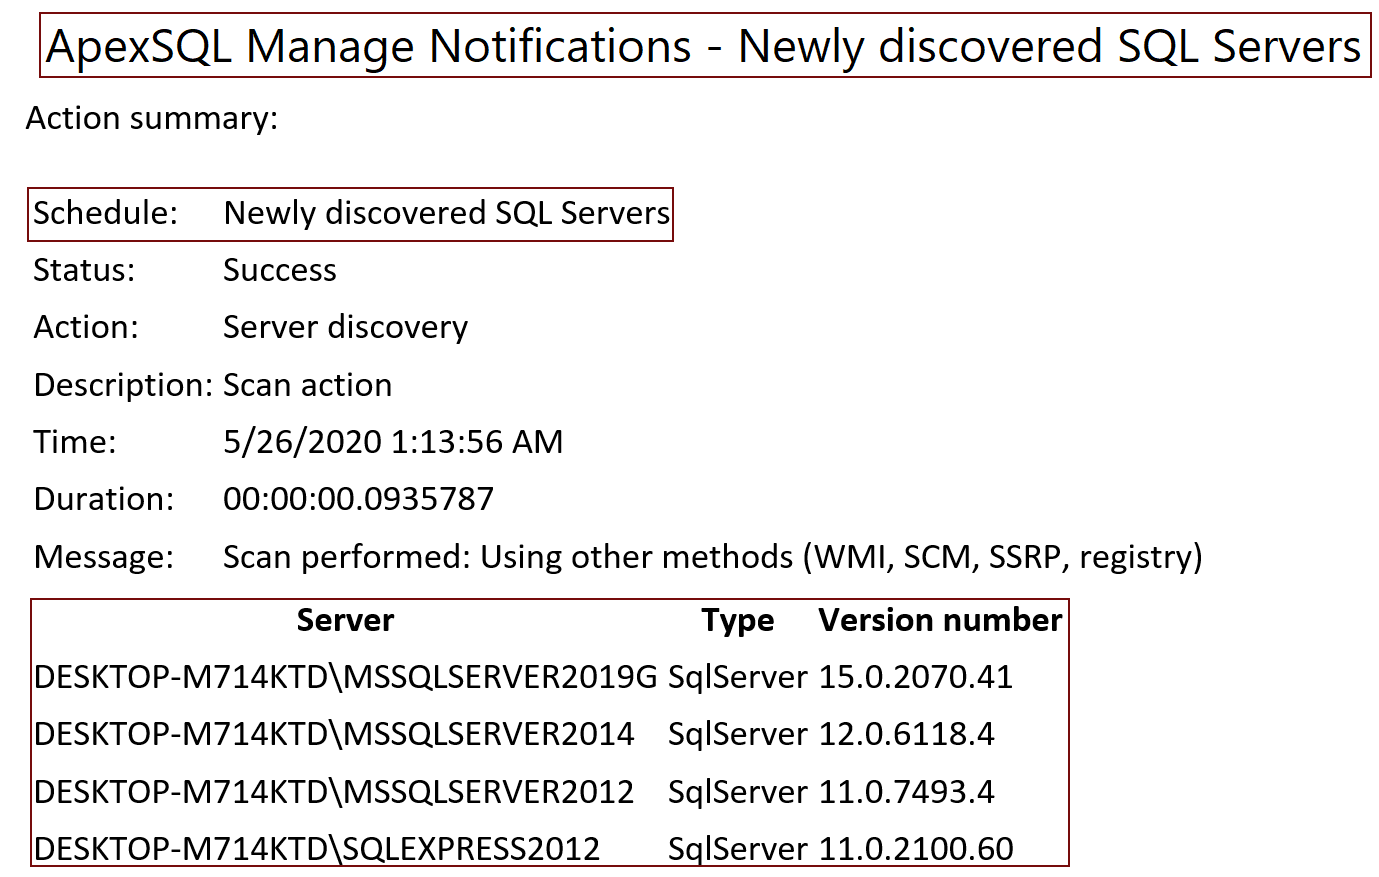 Email notification for newly discovered SQL Server instances sent from ApexSQL Manage 